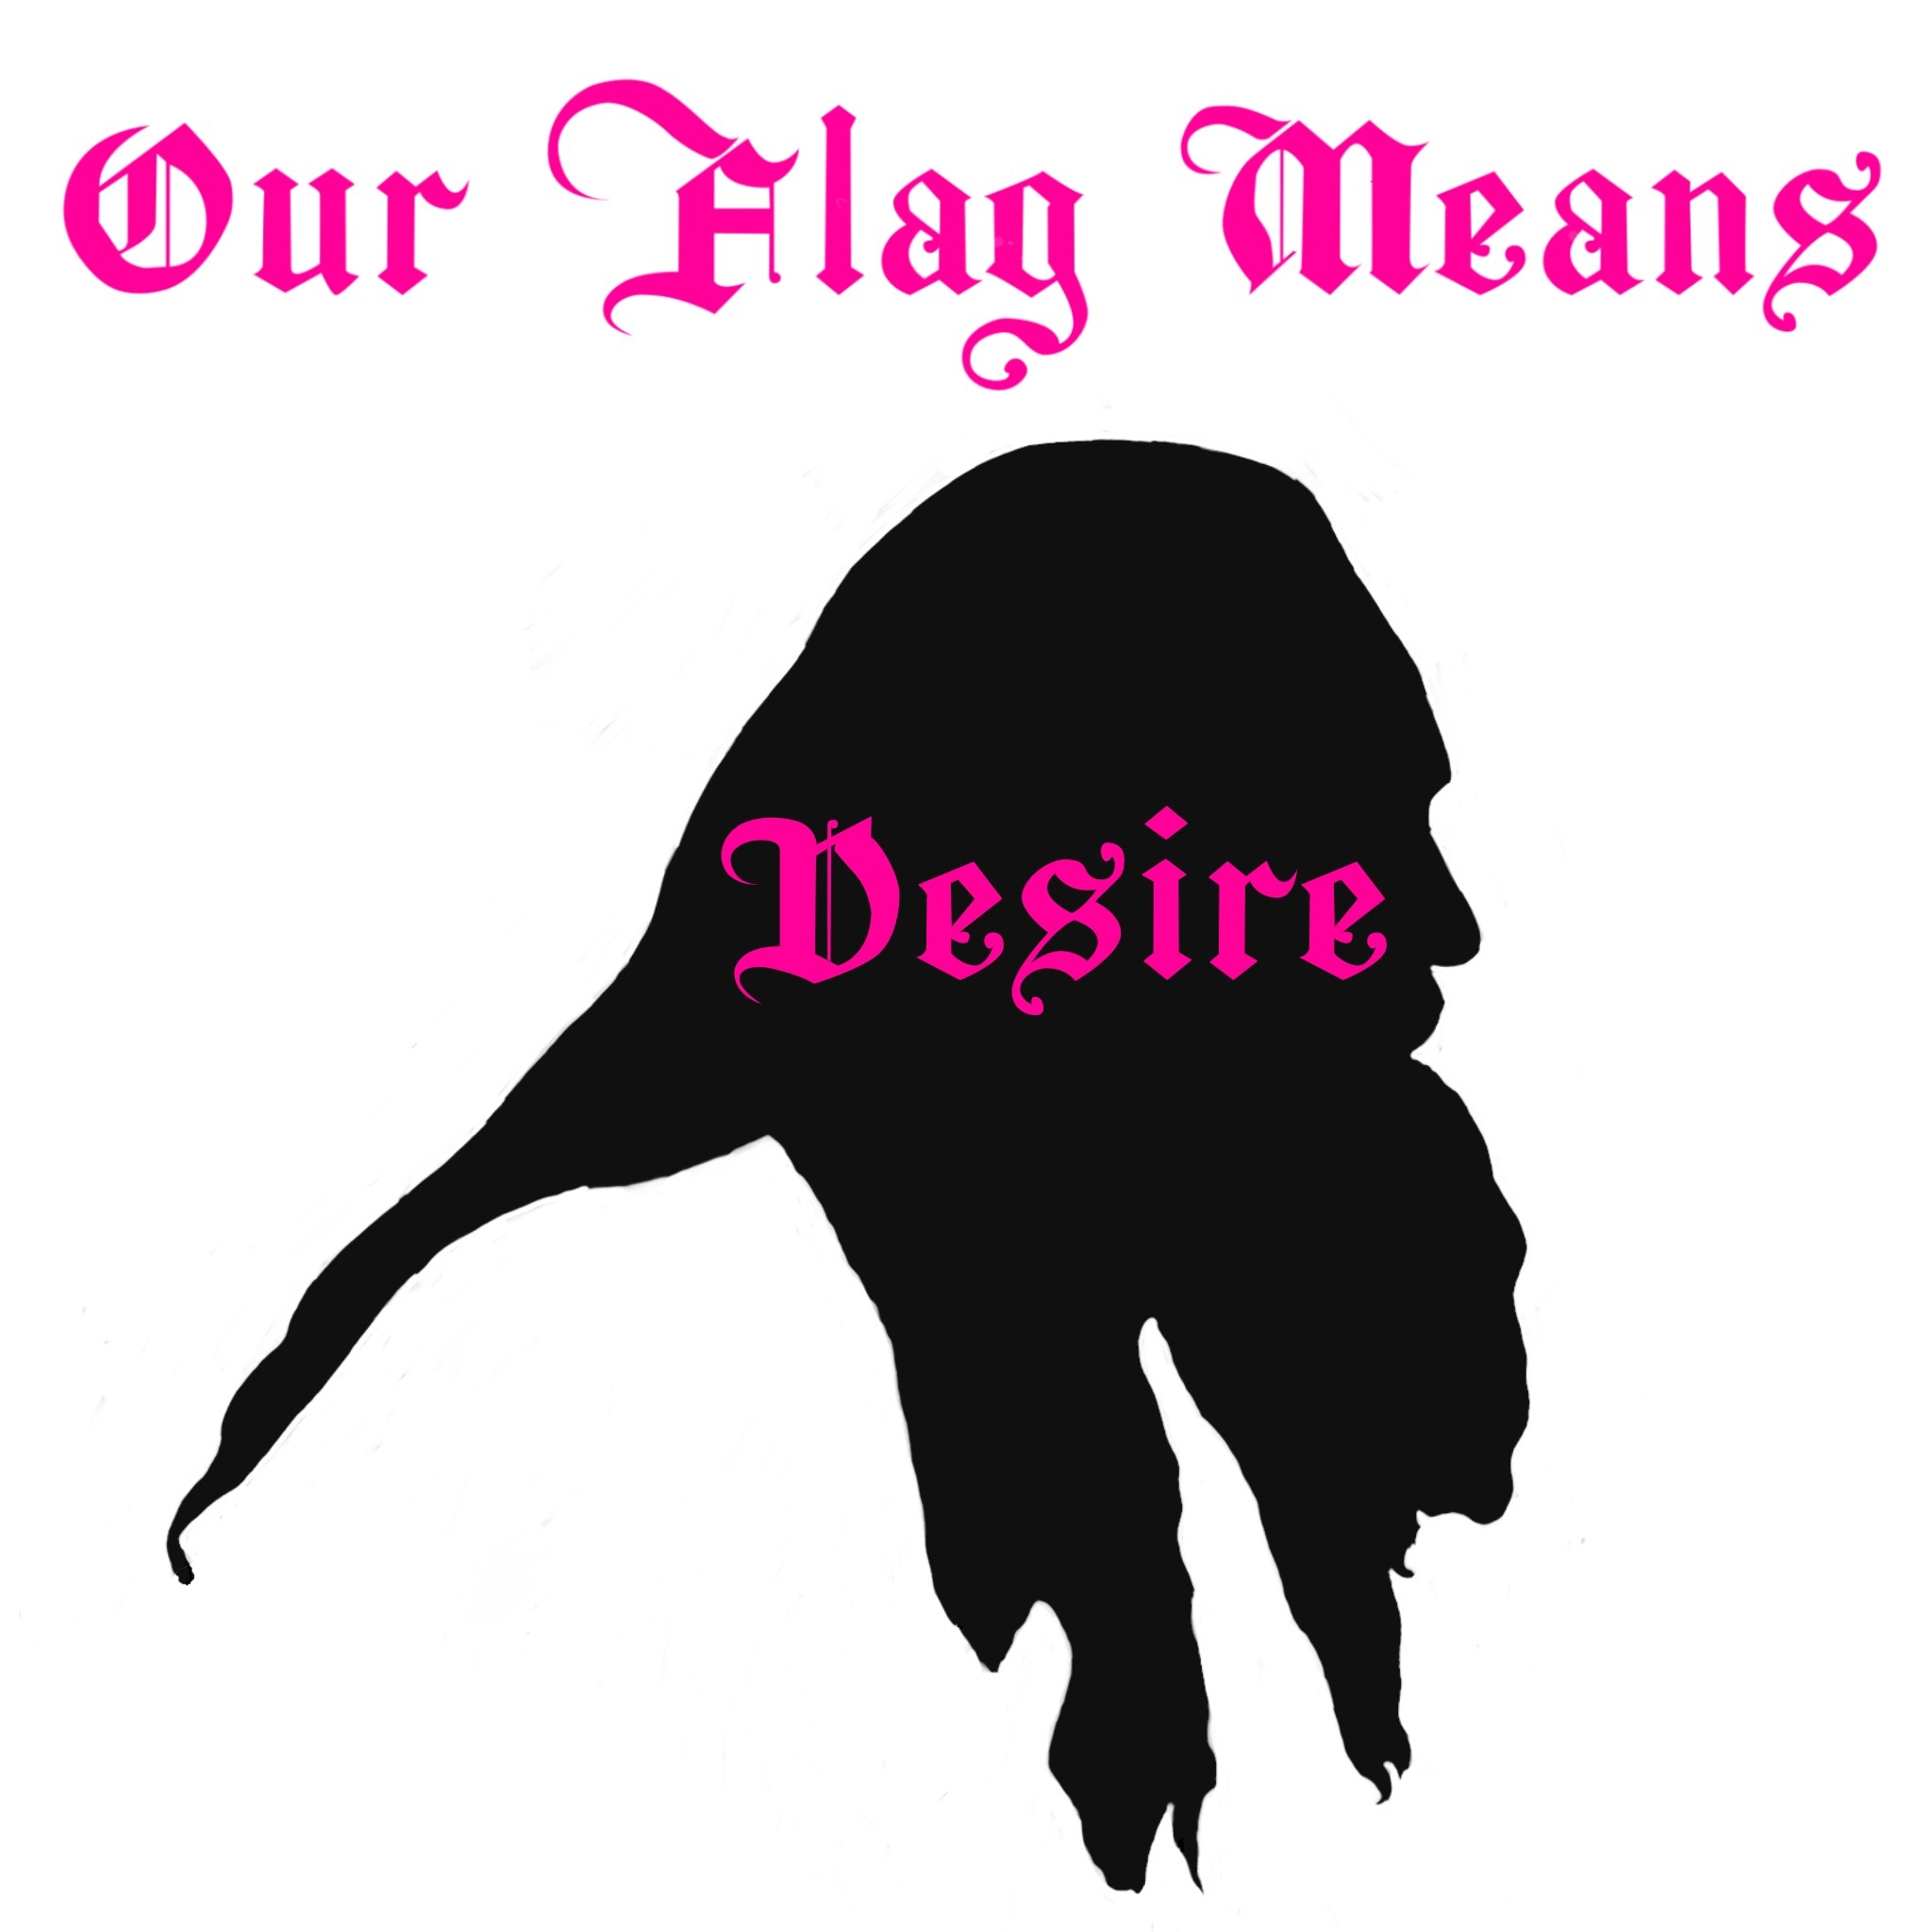 Desire- Our Flag Means Death Episode 4 "Discomfort in a Married State"